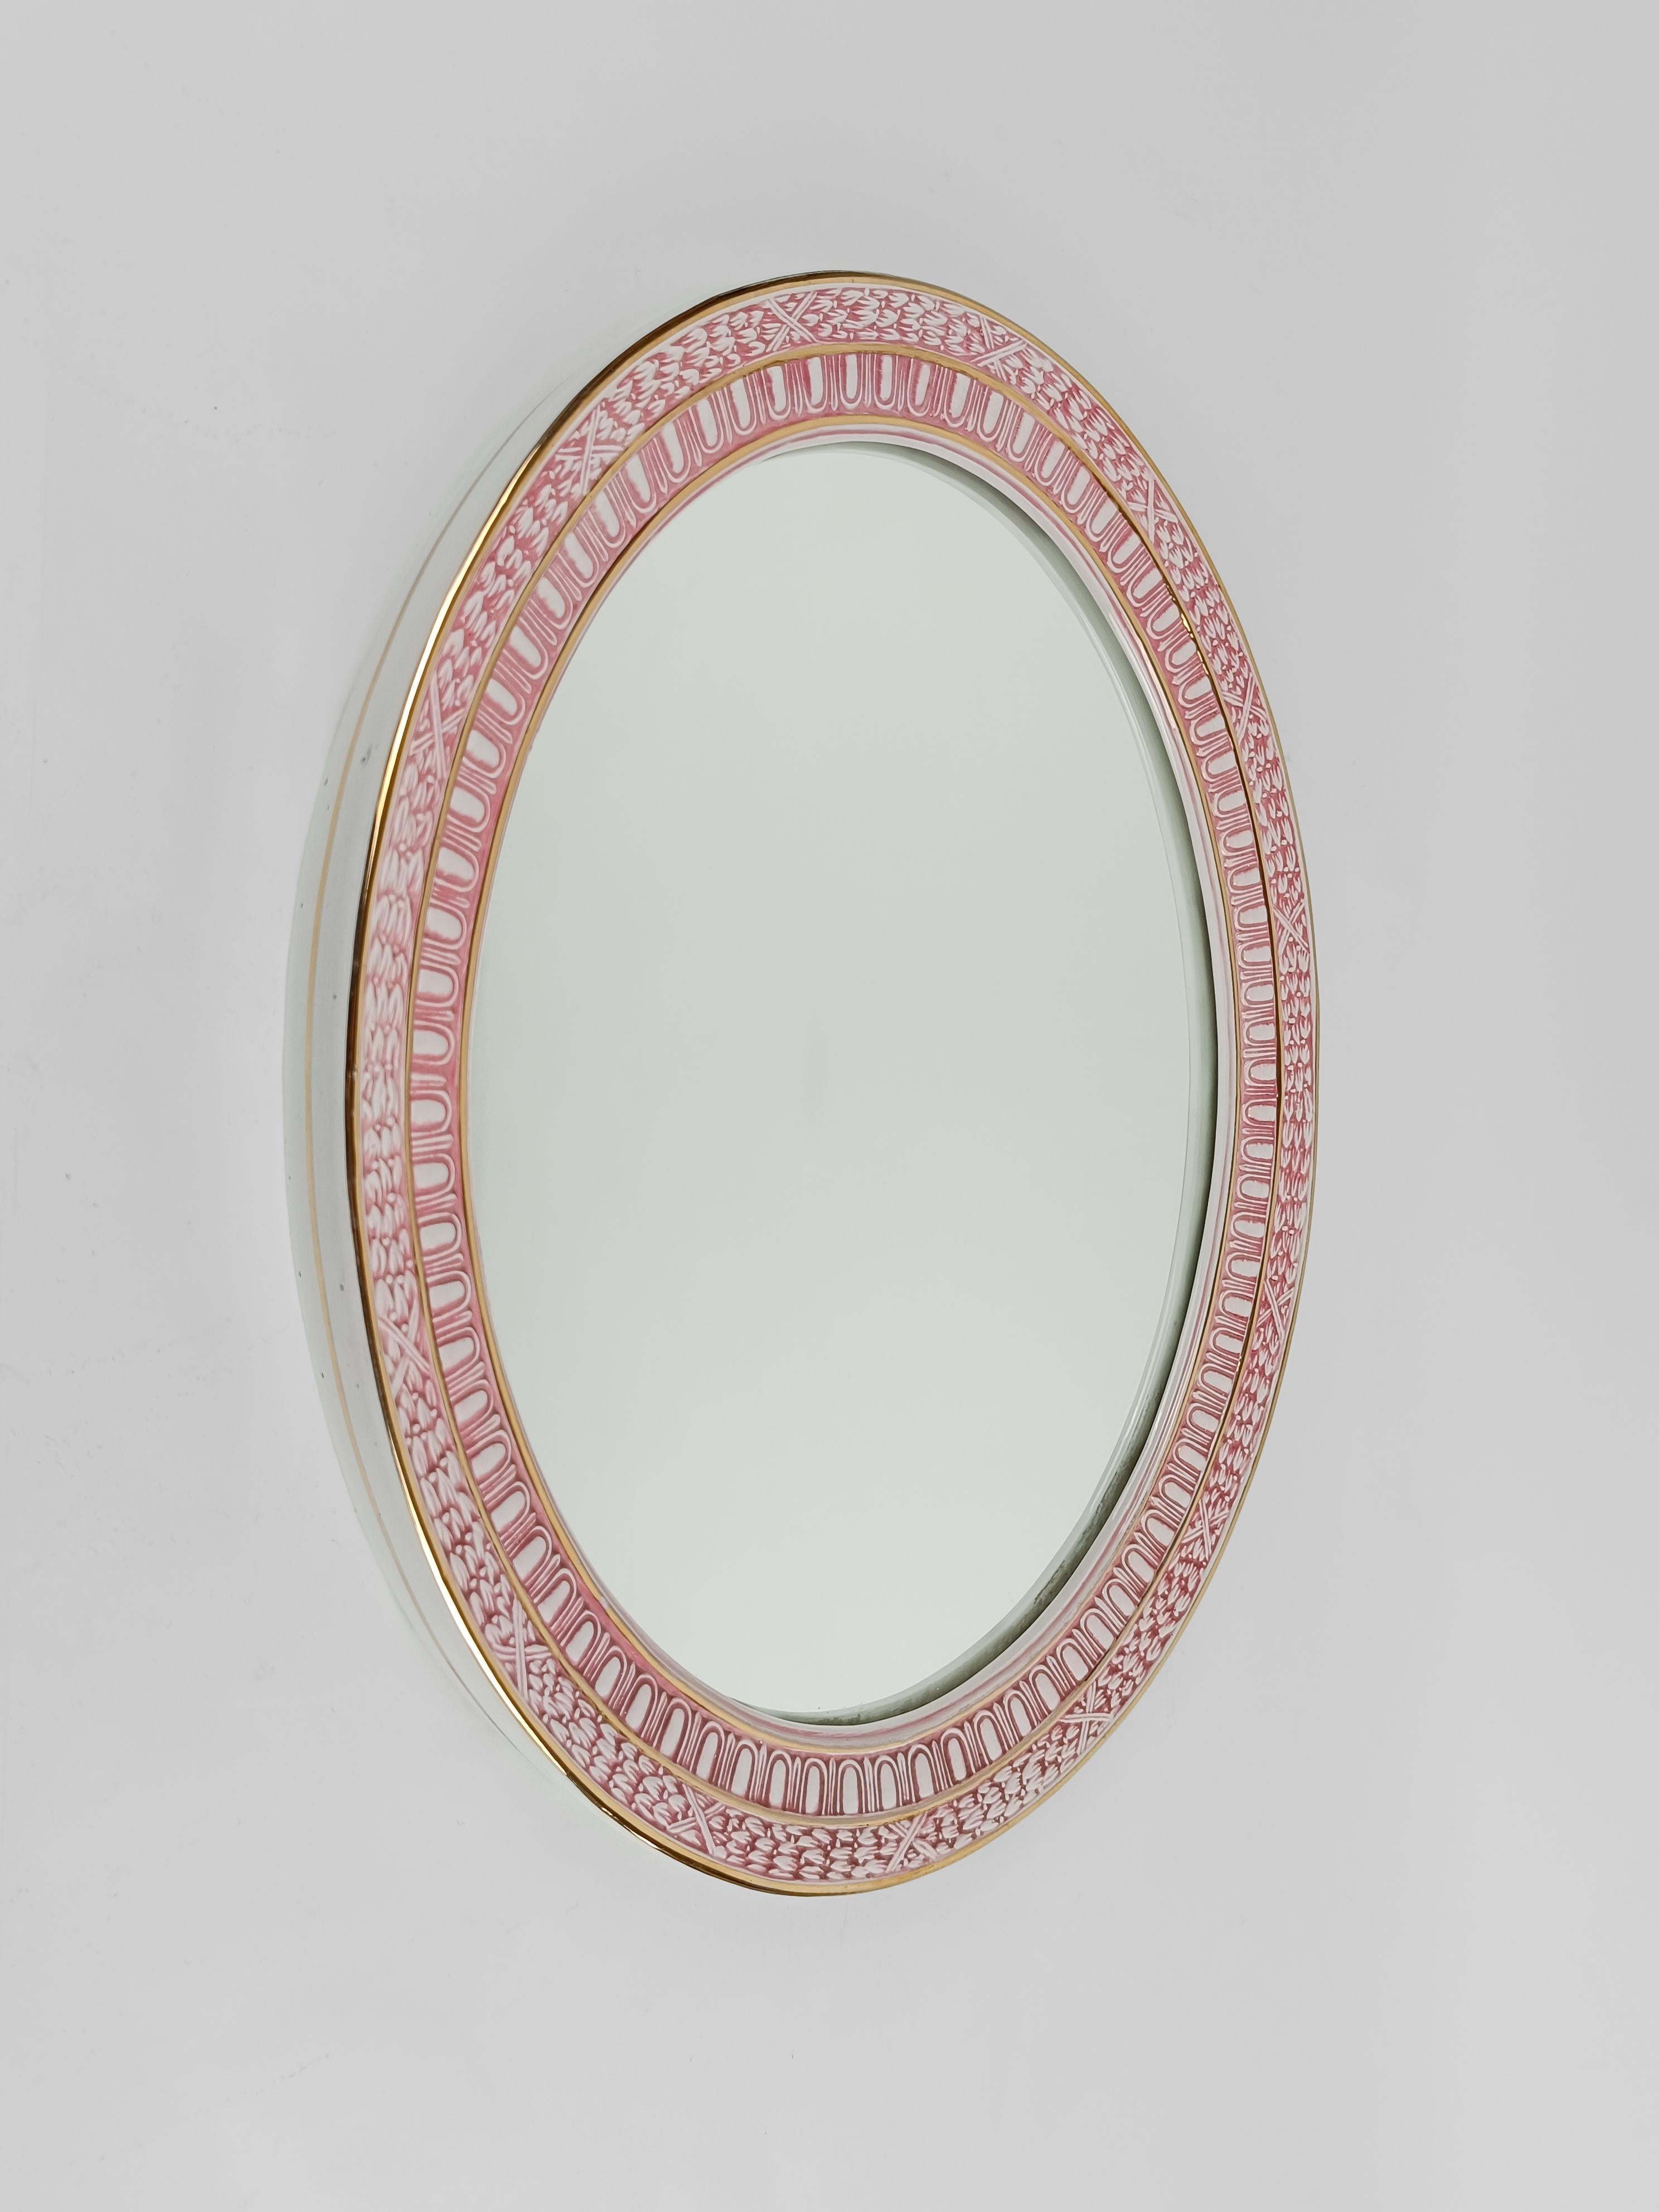 20th Century Oval Mirror with Regency Decoration in the style of P. Fornasetti, Italy 1950s